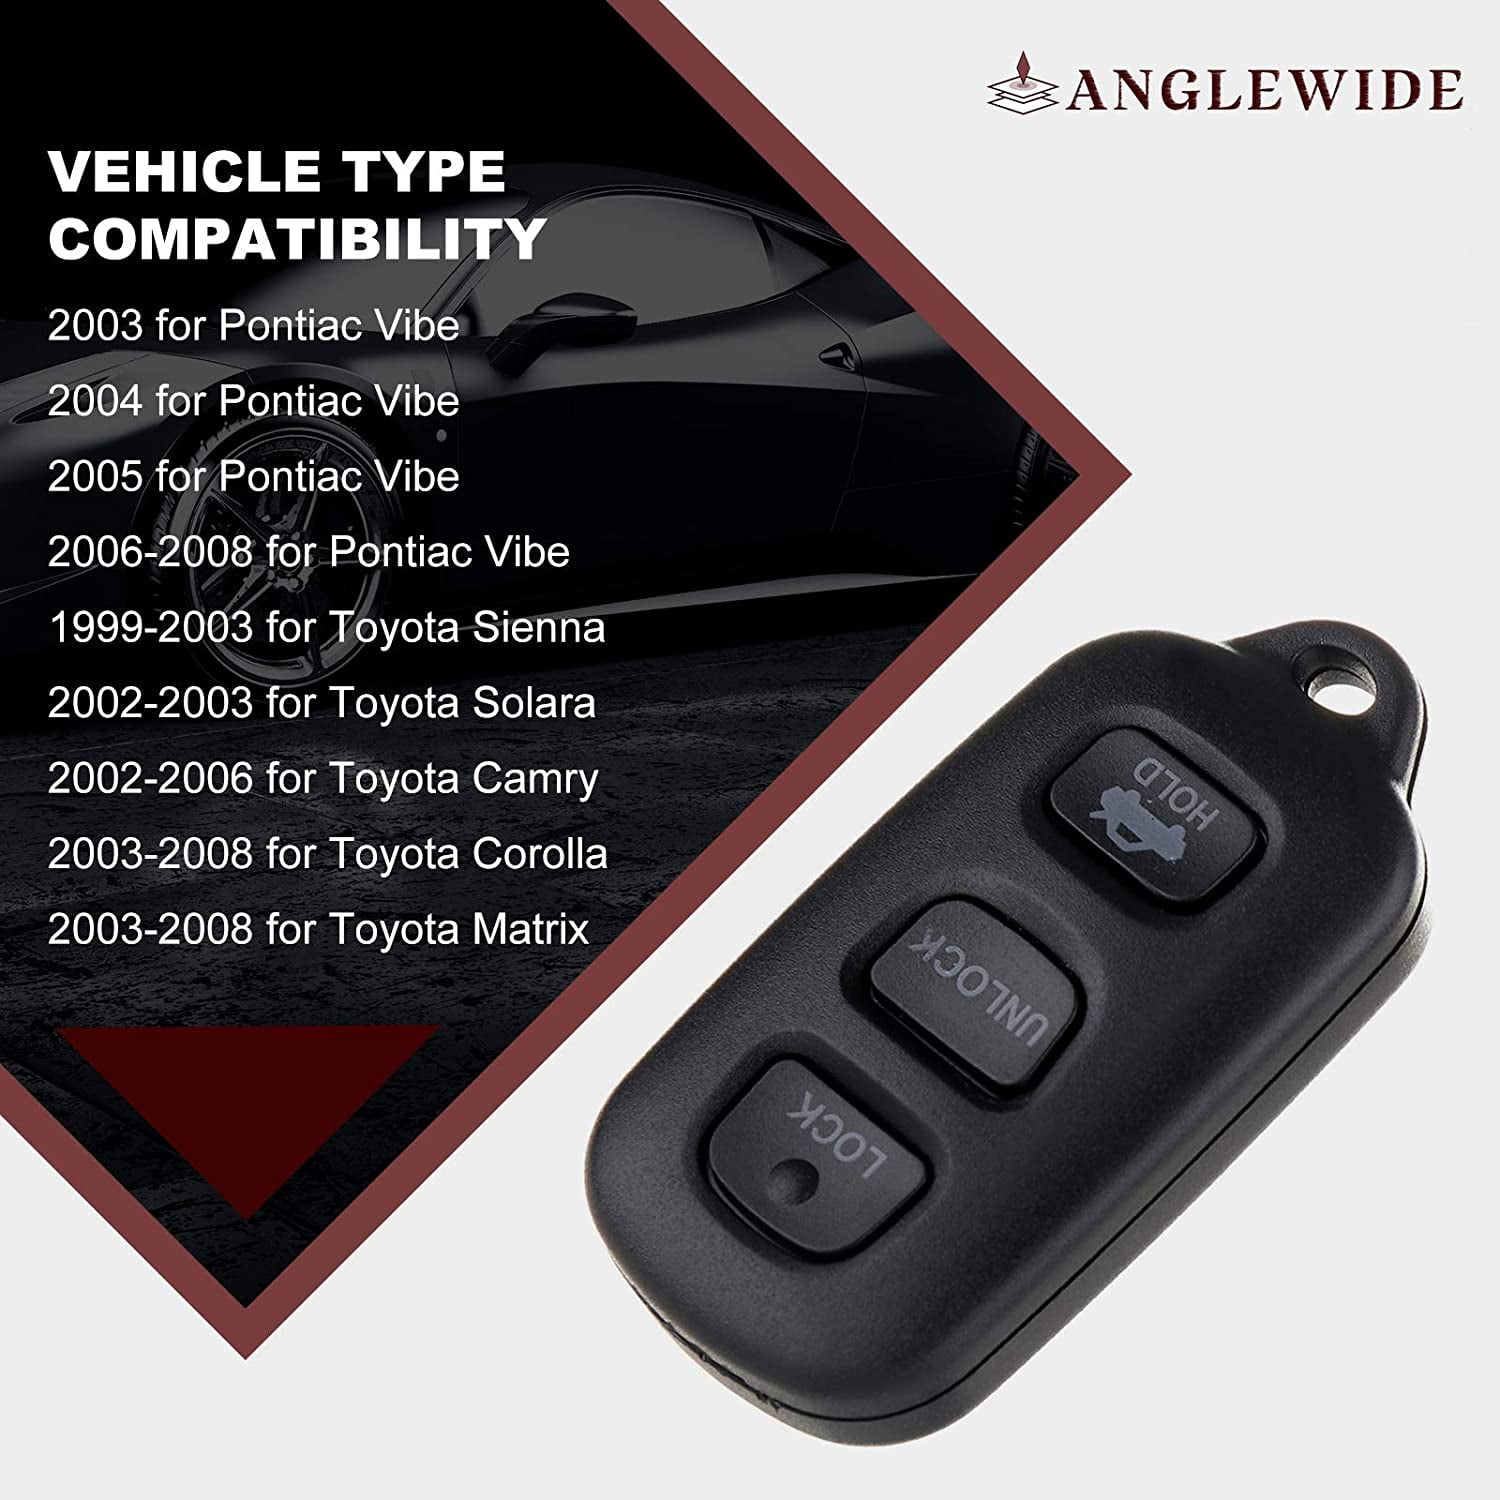 Replacement for Toyota Corolla Matrix Vibe Keyless Entry Remote Car Key Fob 